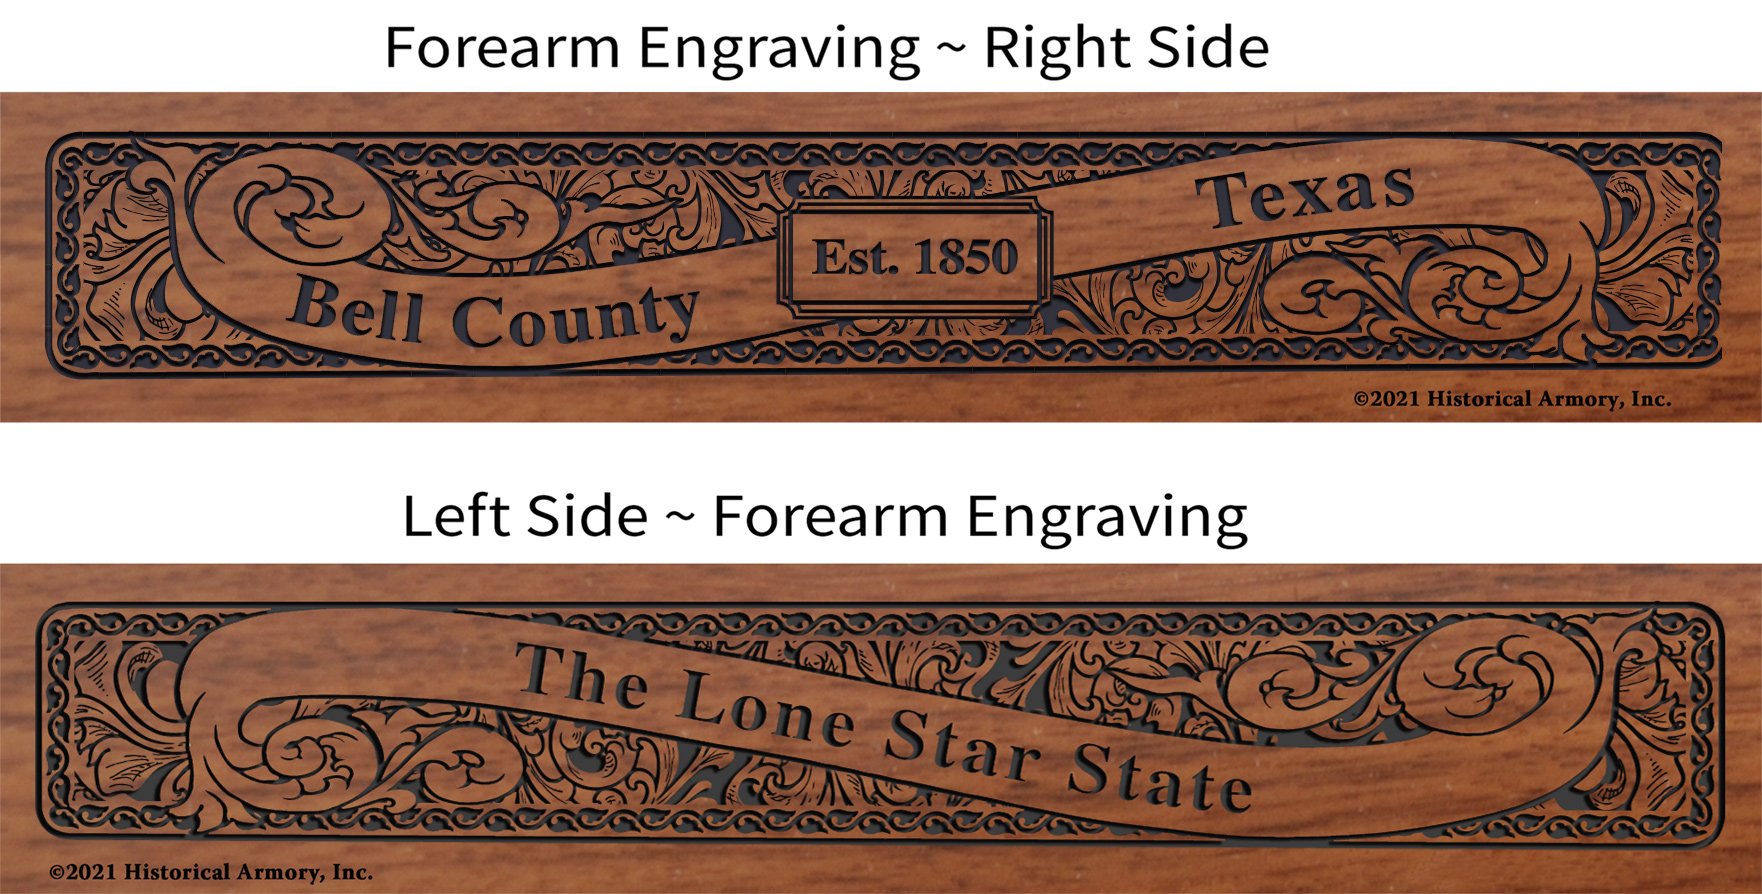 Bell County Texas Establishment and Motto History Engraved Rifle Forearm